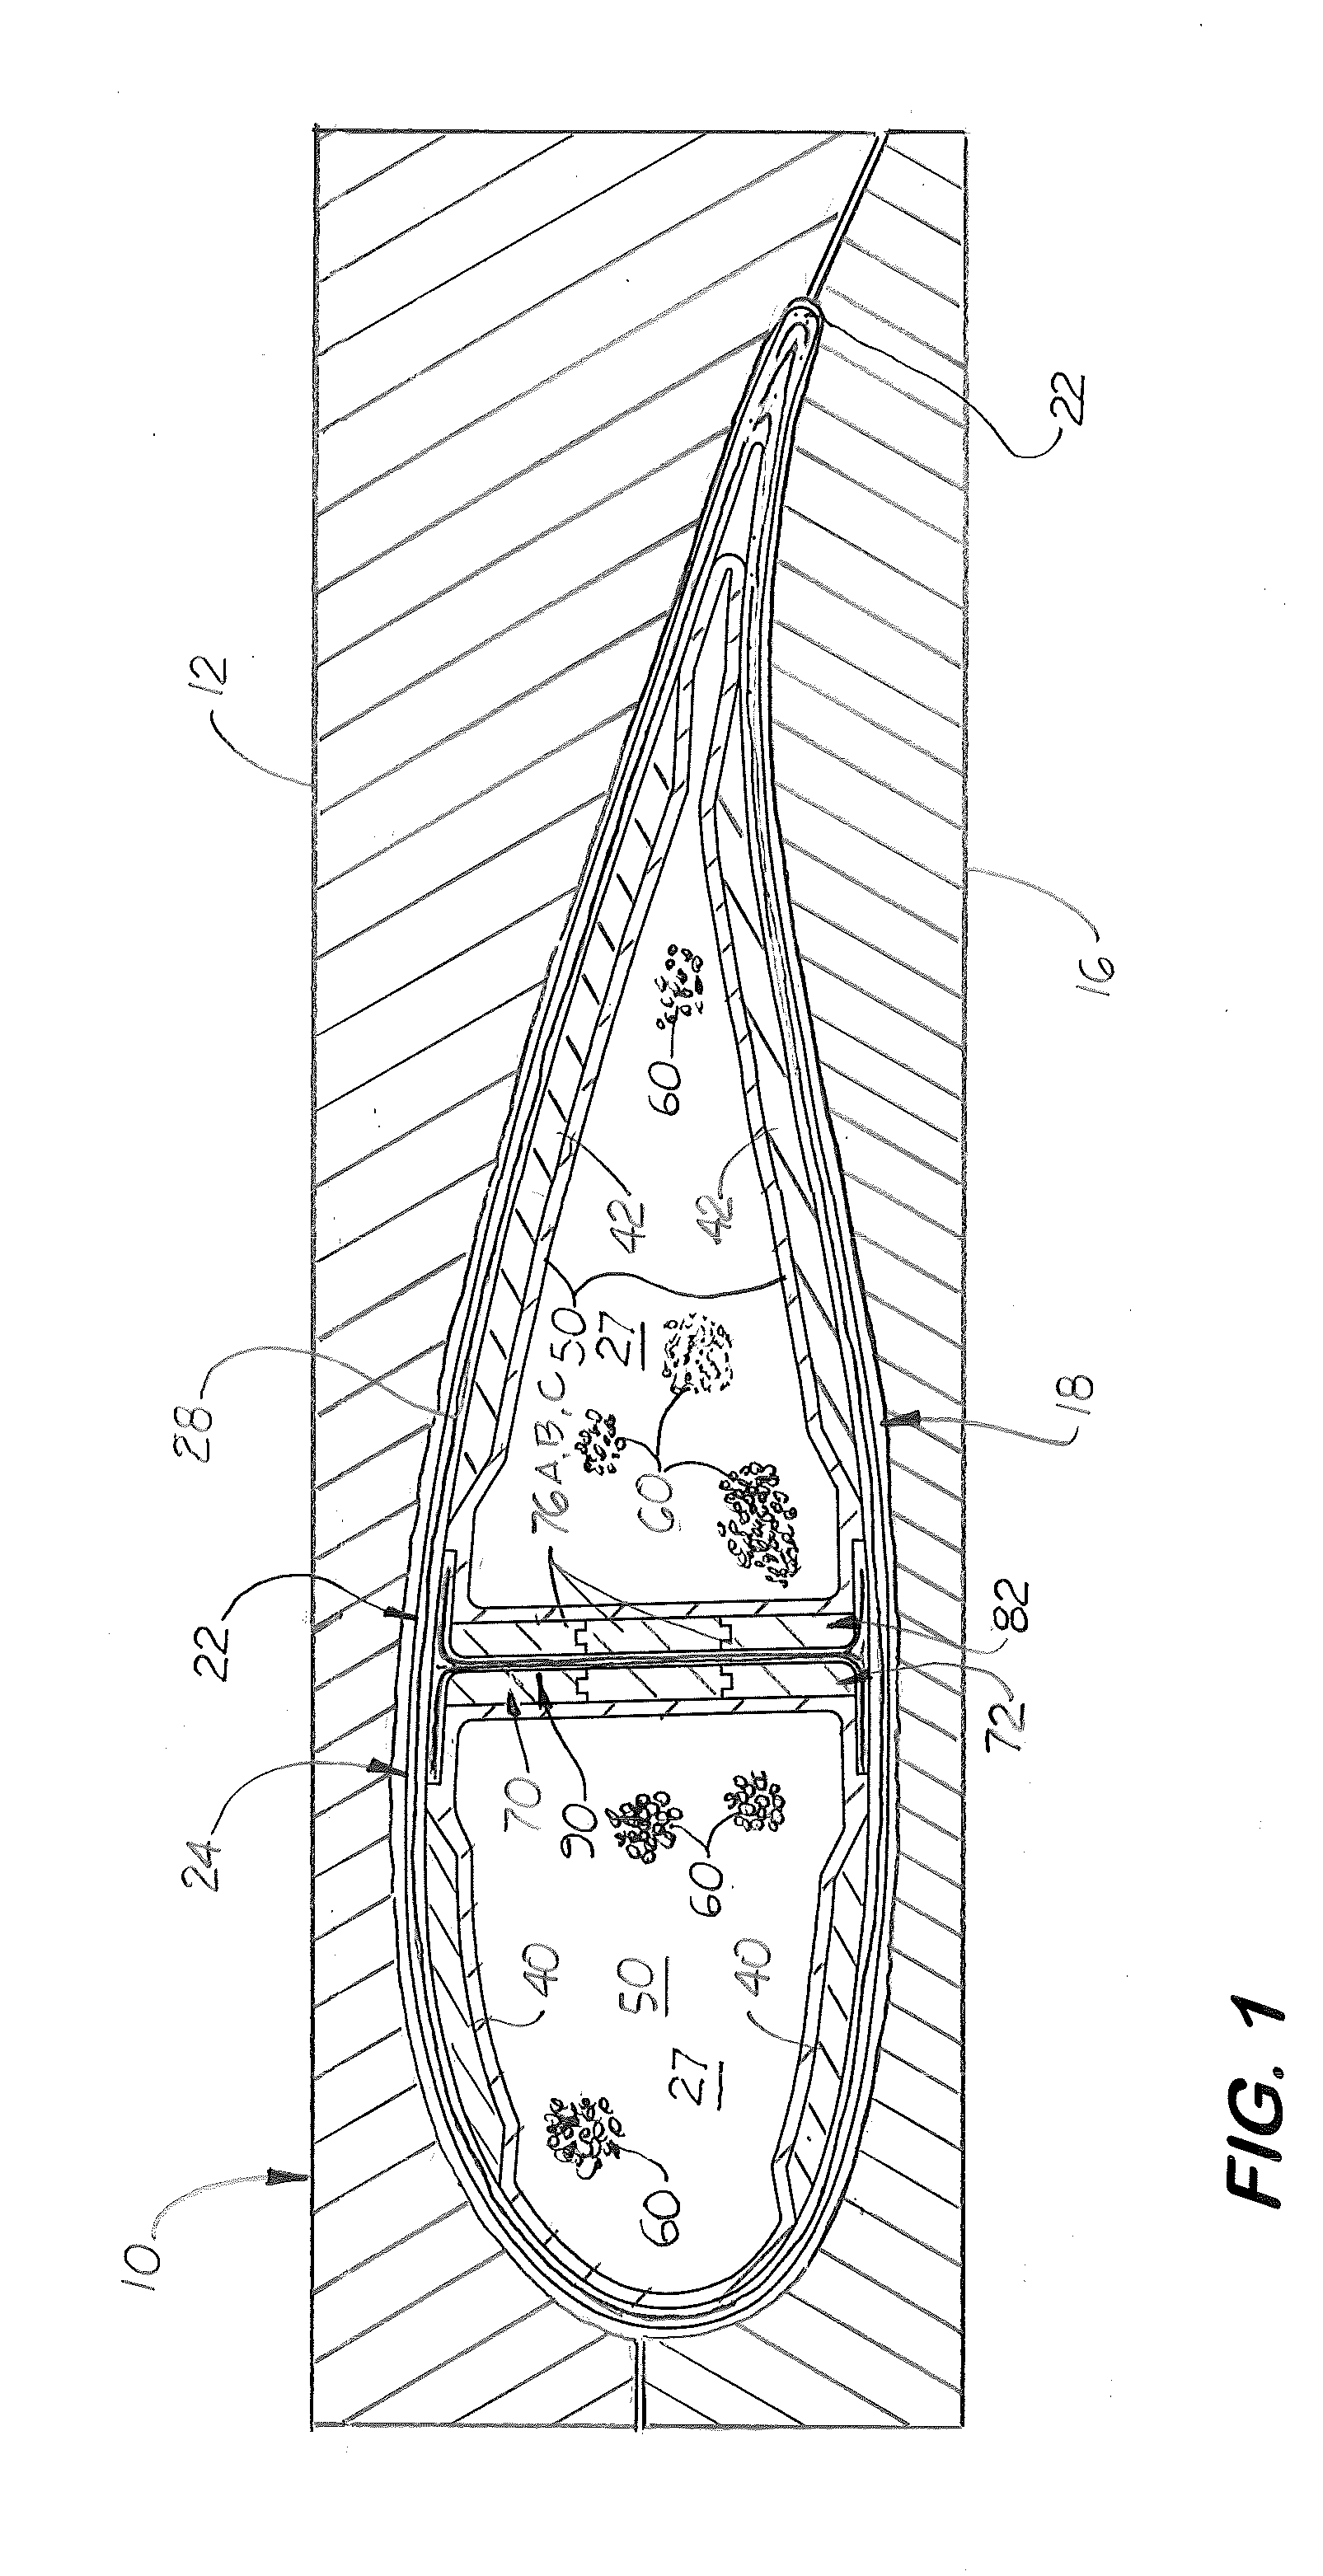 Method of Manufacturing Hollow Composite Parts with In Situ Formed Internal Structures